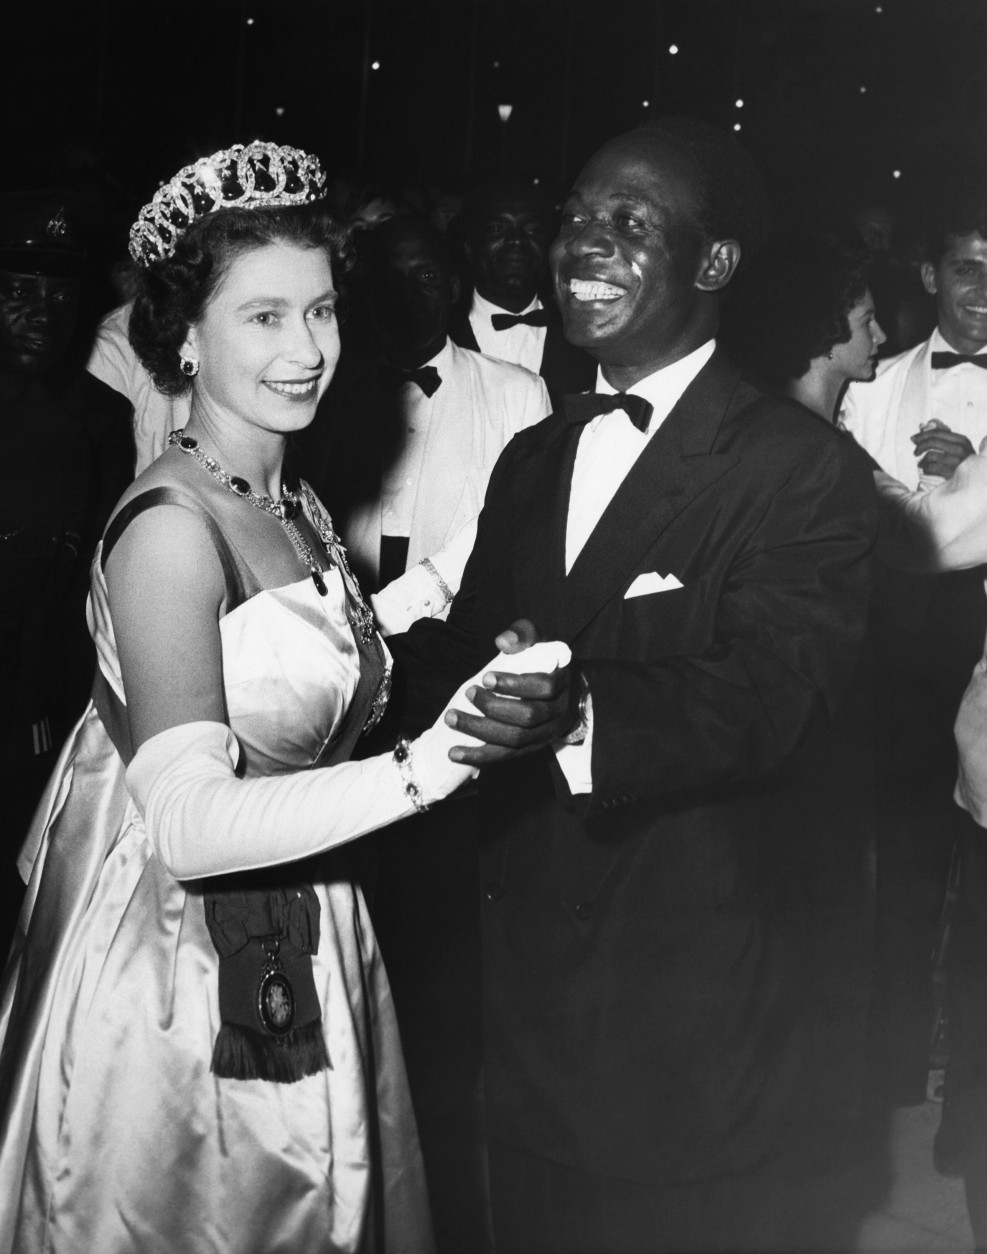 Queen Elizabeth II is partnered by Ghana President Kwame Nkrumah as they dance the popular Ghana rhythmic shuffle known as the "High Life" at a farewell ball given in honor of the Queen and her husband at the state house in Accra, Ghana at night on Saturday, Nov. 18, 1961. (AP Photo)